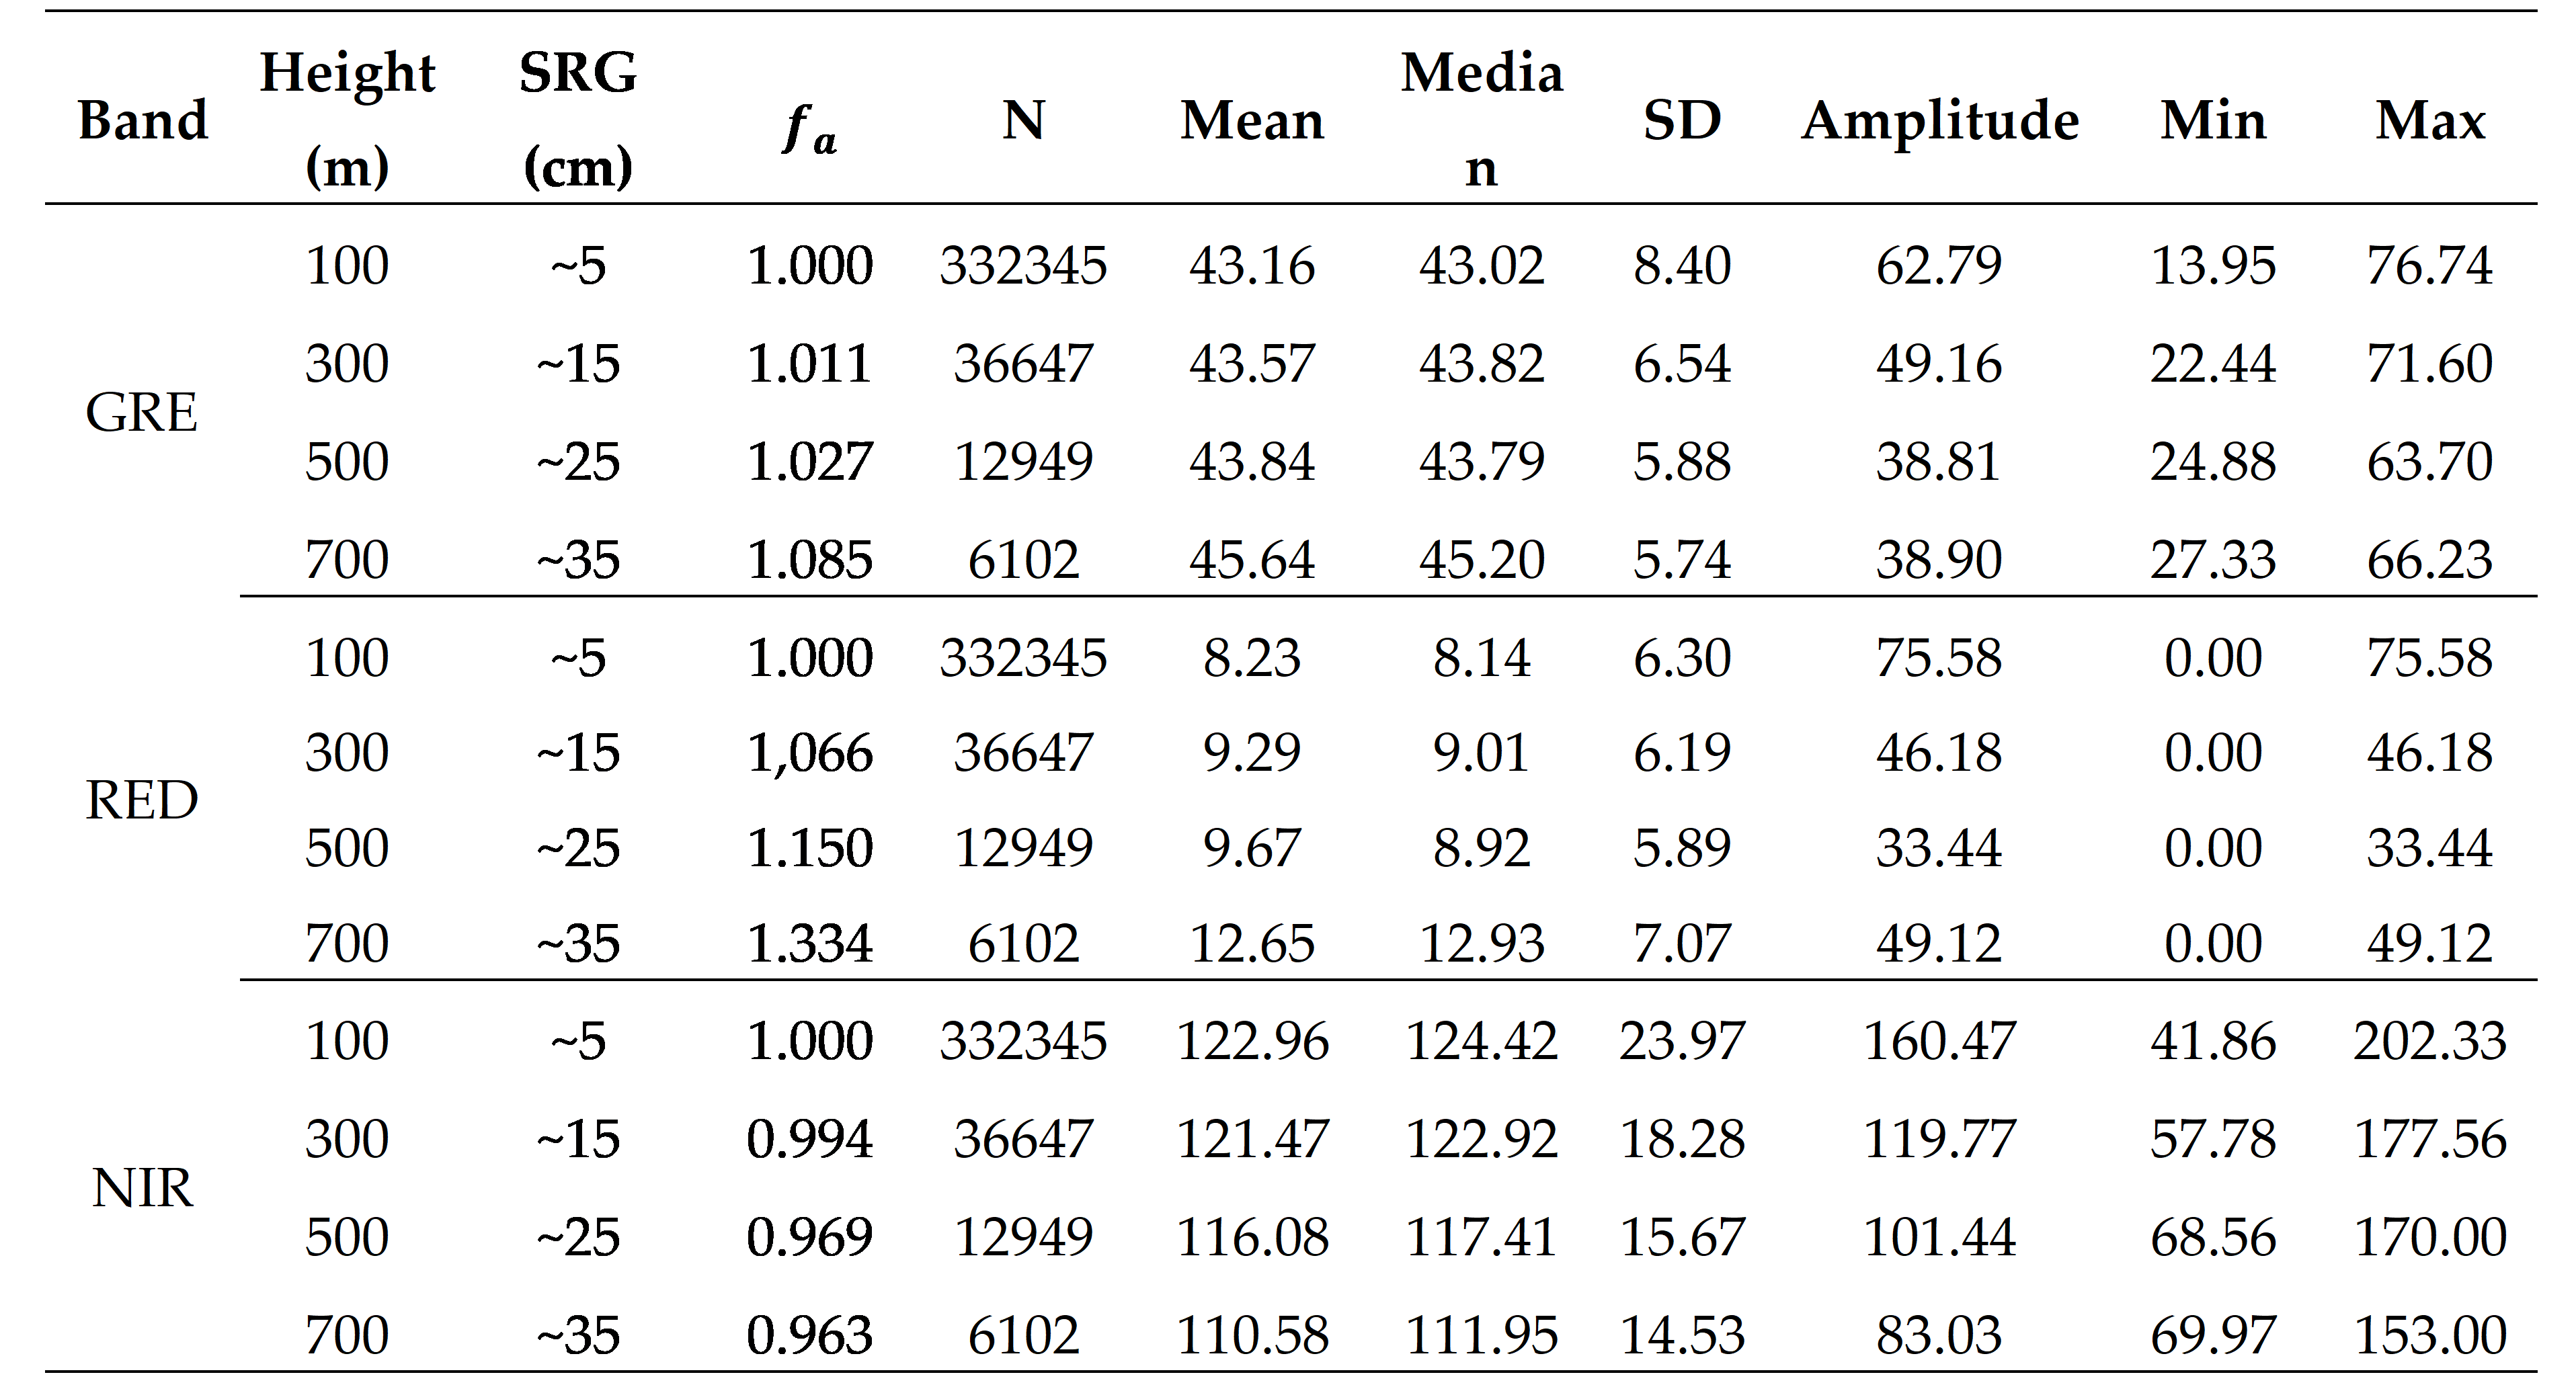 Table 1. Spatial Resolution at Ground (SRG), Atmospheric normalization factor (f_a), and descriptive statistics of cotton pixel values after atmospheric normalization (DCnor) for the three spectral bands and different flight heights. The trends of the statistical parameters do not change; an identical pixel pixel number (n=6102) is generated for all flight heights by random sampling. According to the MWT, all distributions of the band-specific DCnor from different heights are significantly equal (p>0.05).